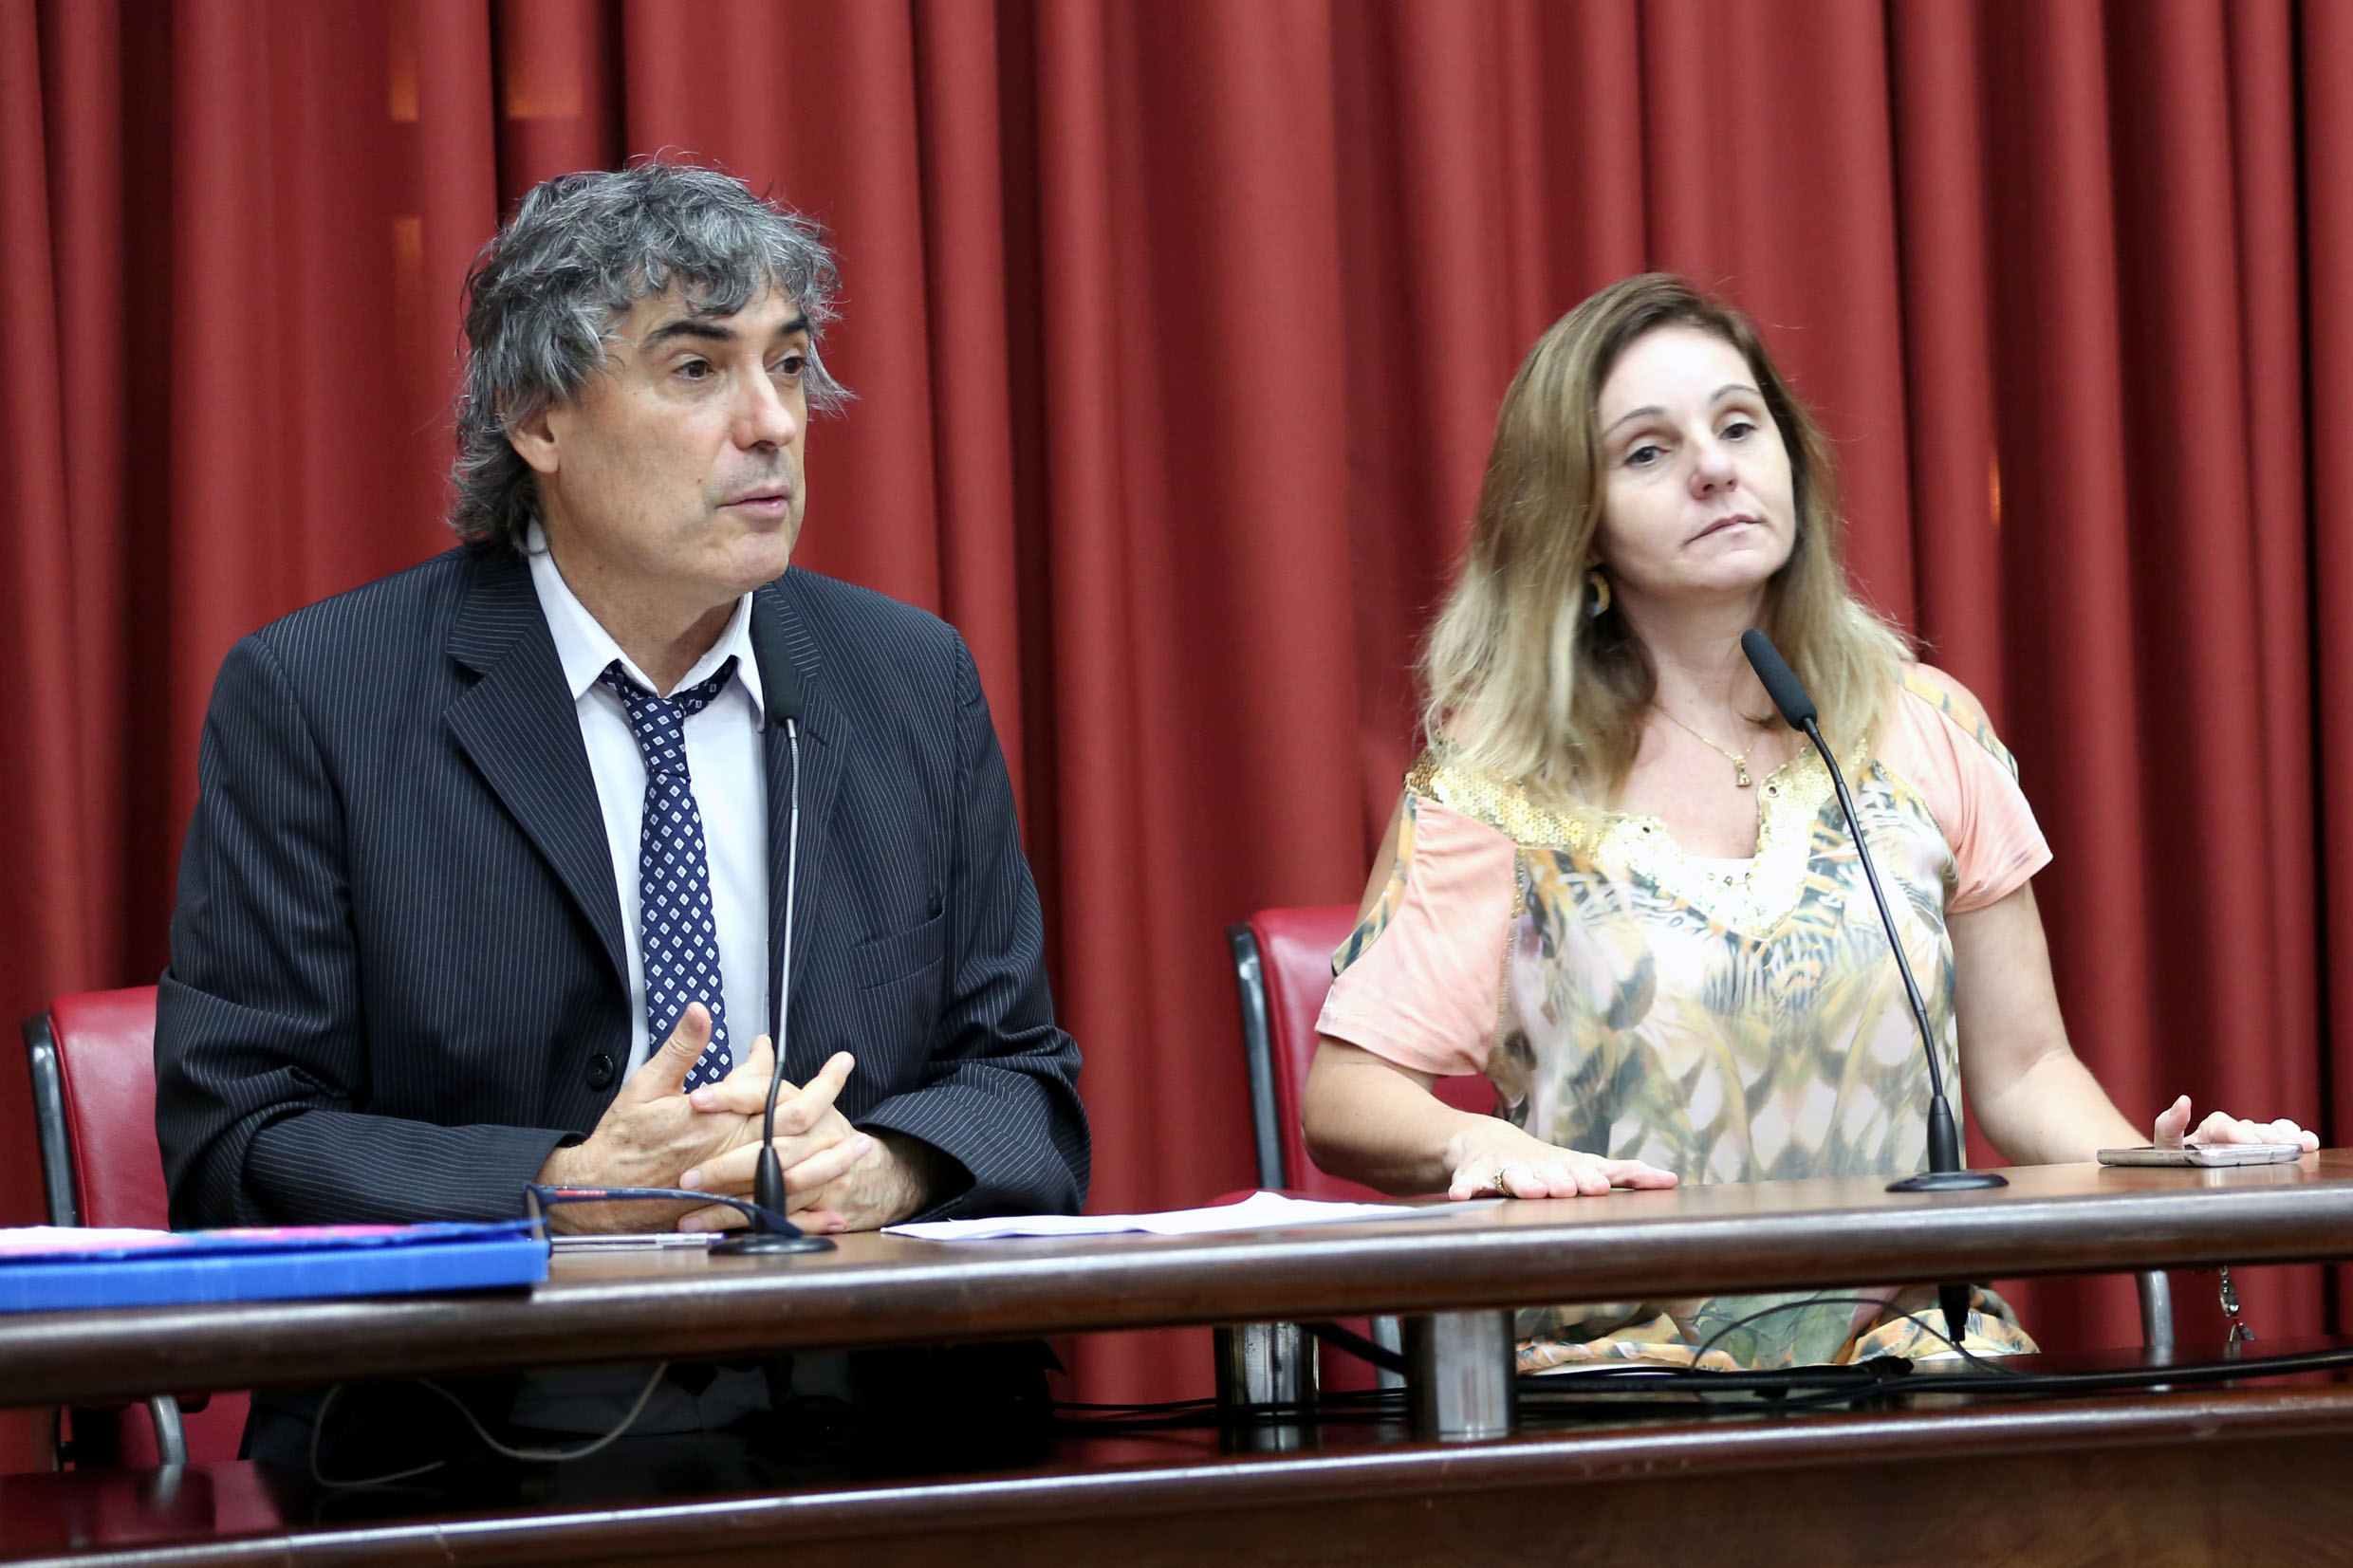 Carlos Gianazzi e  Claudia Pompeo<a style='float:right' href='https://www3.al.sp.gov.br/repositorio/noticia/N-12-2019/fg245957.jpg' target=_blank><img src='/_img/material-file-download-white.png' width='14px' alt='Clique para baixar a imagem'></a>